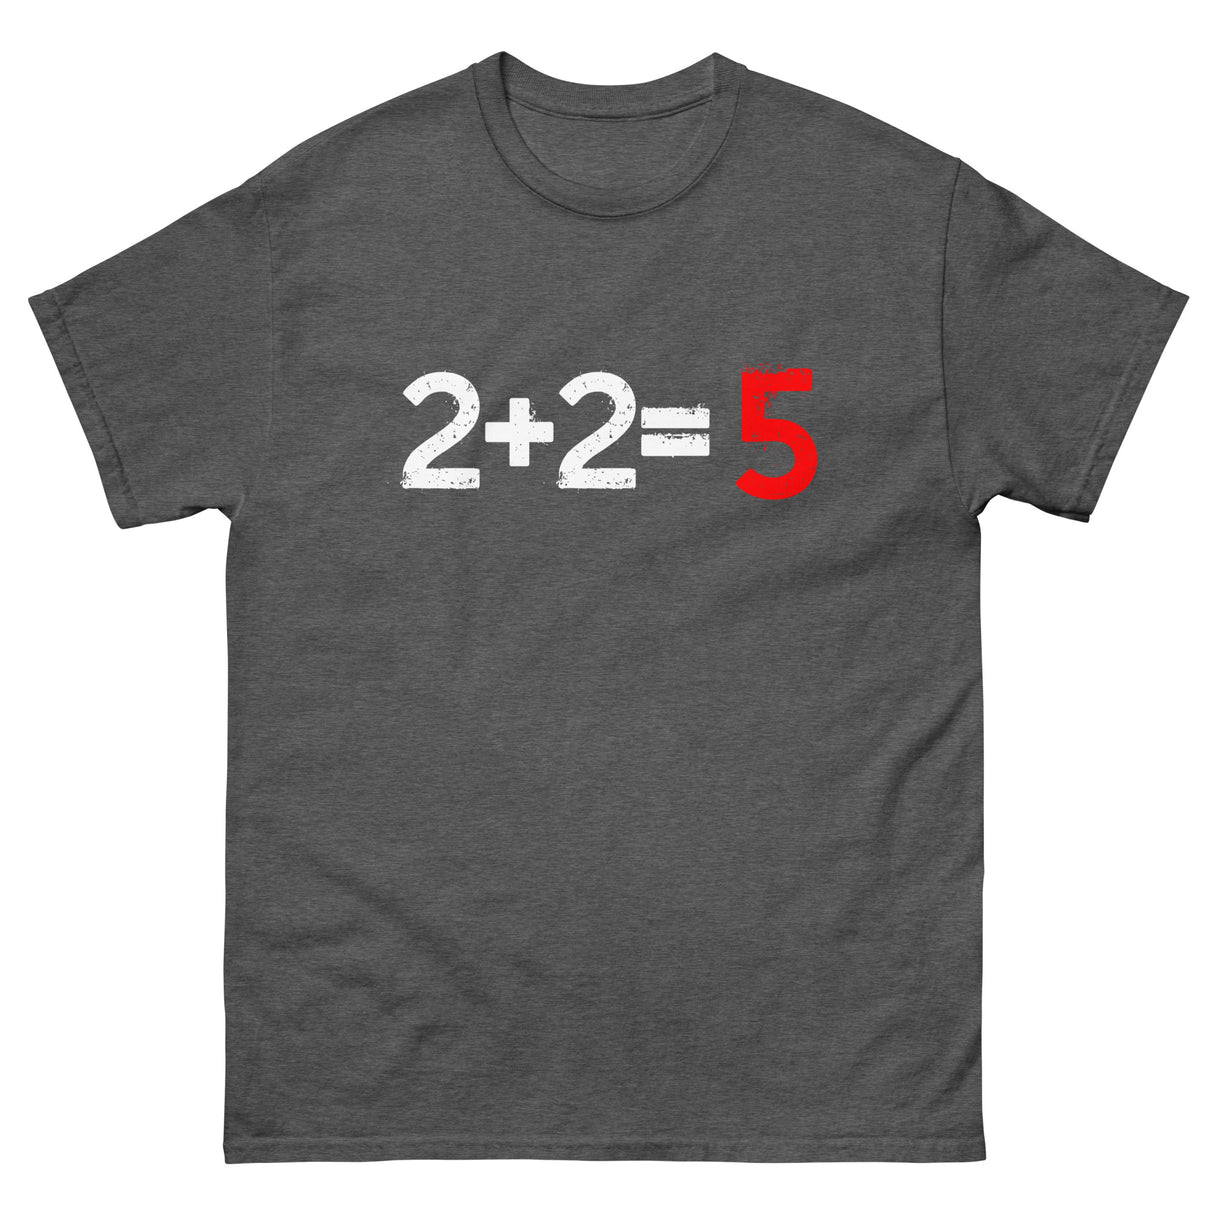 Two Plus Two Equals Five Heavy Cotton Shirt - Libertarian Country